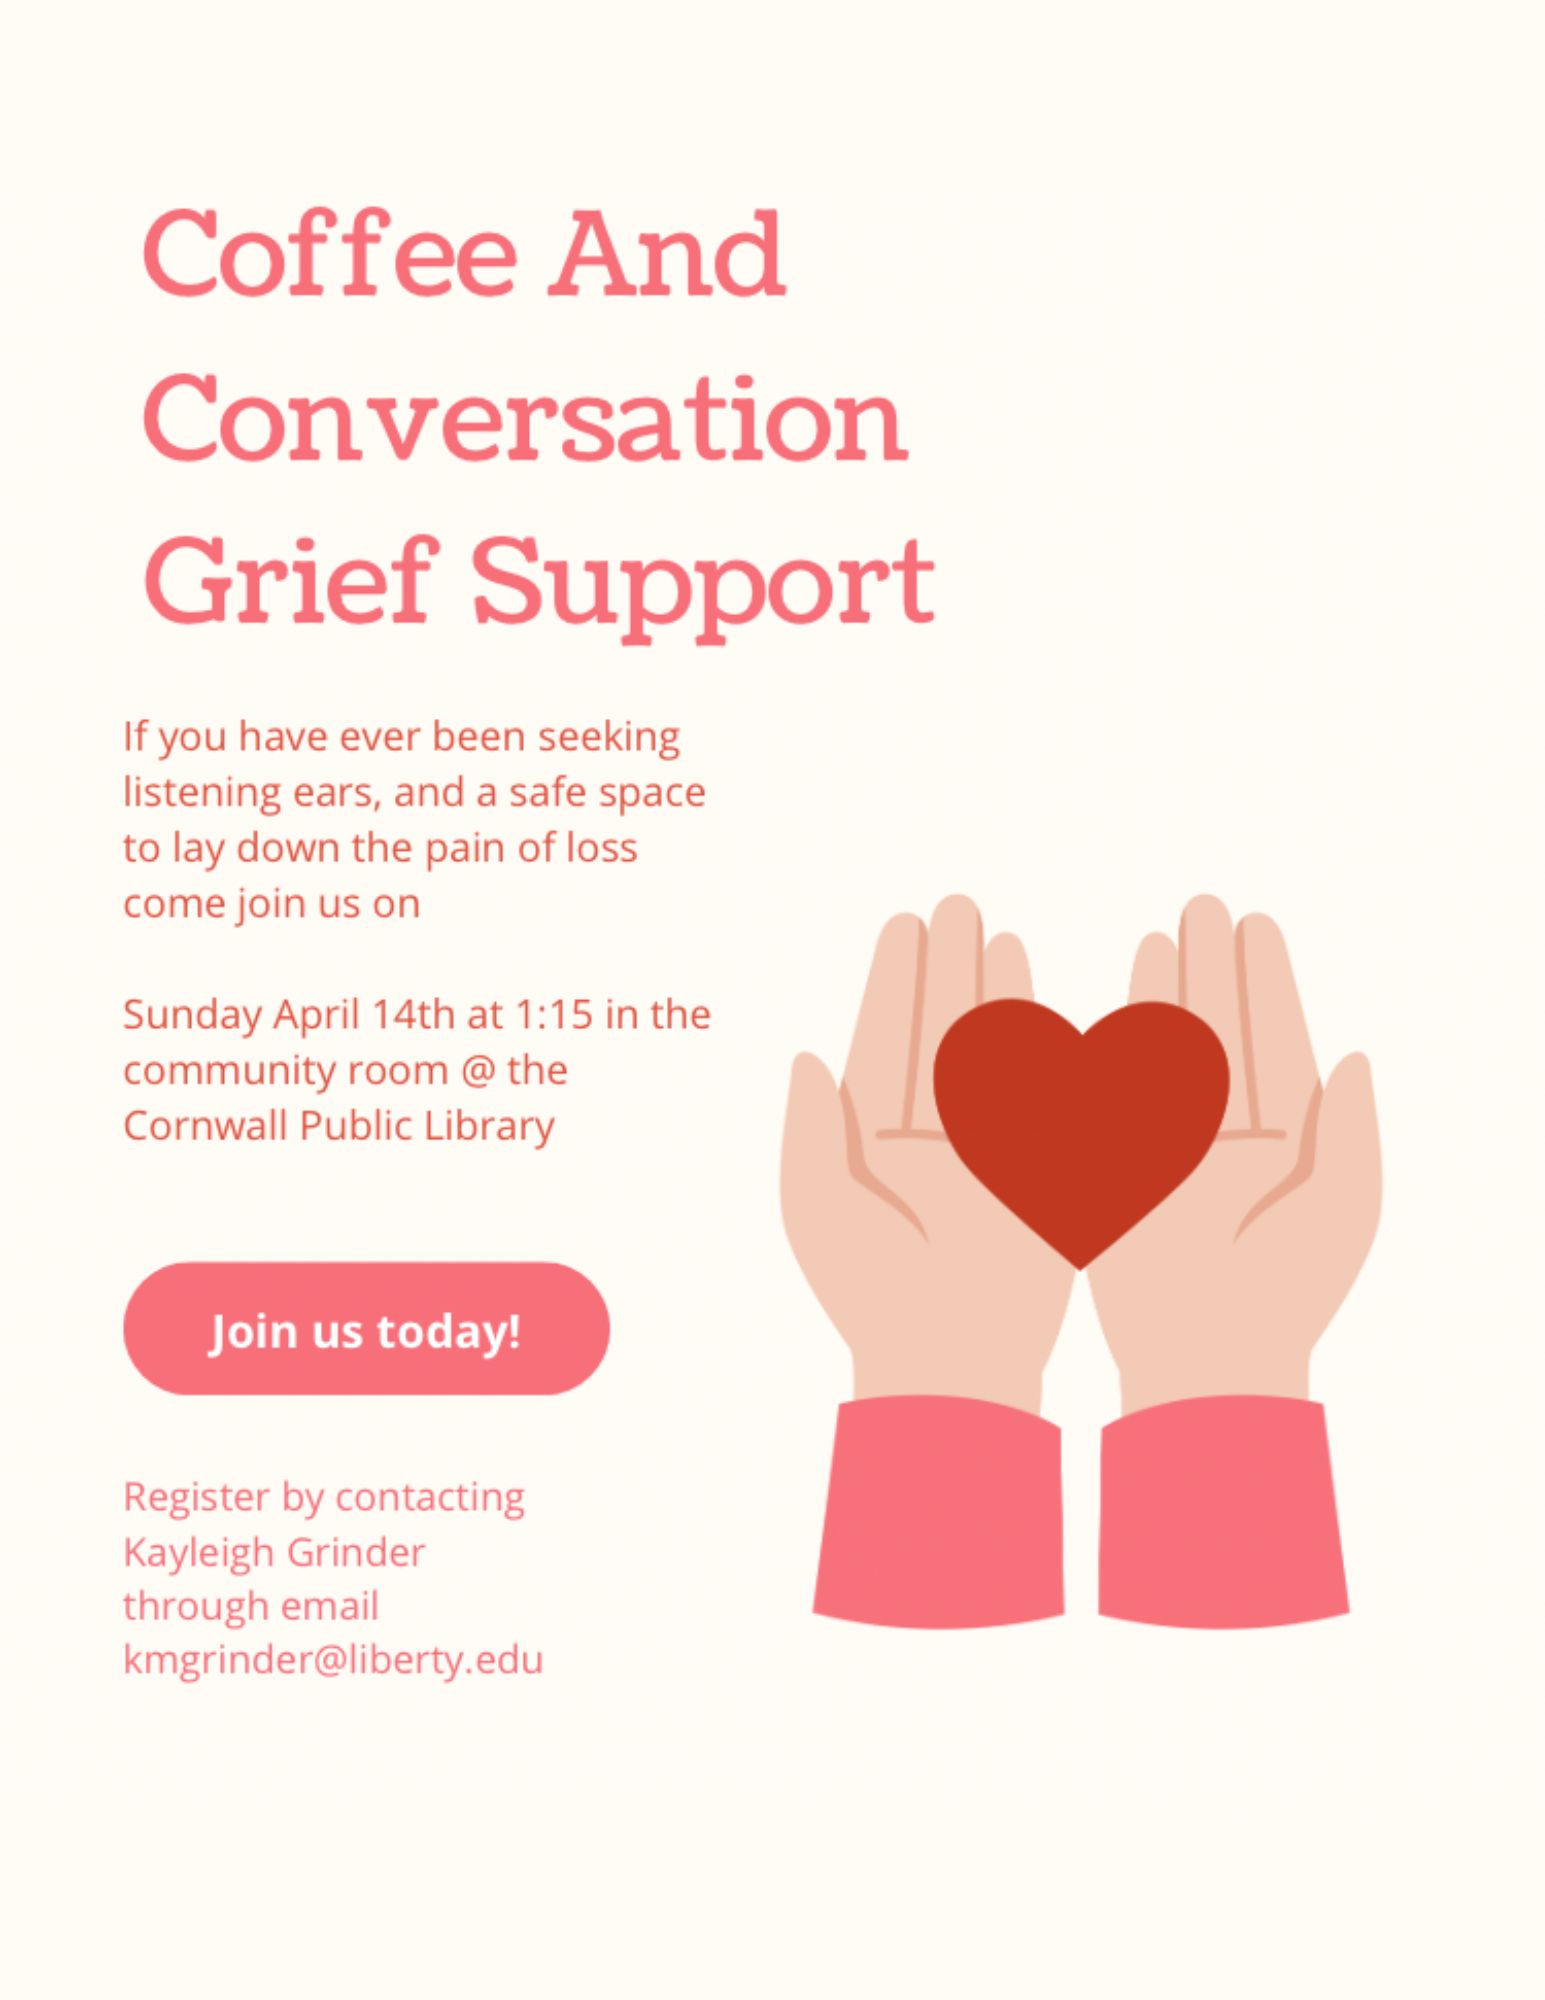 Coffee and Conversation Grief Support